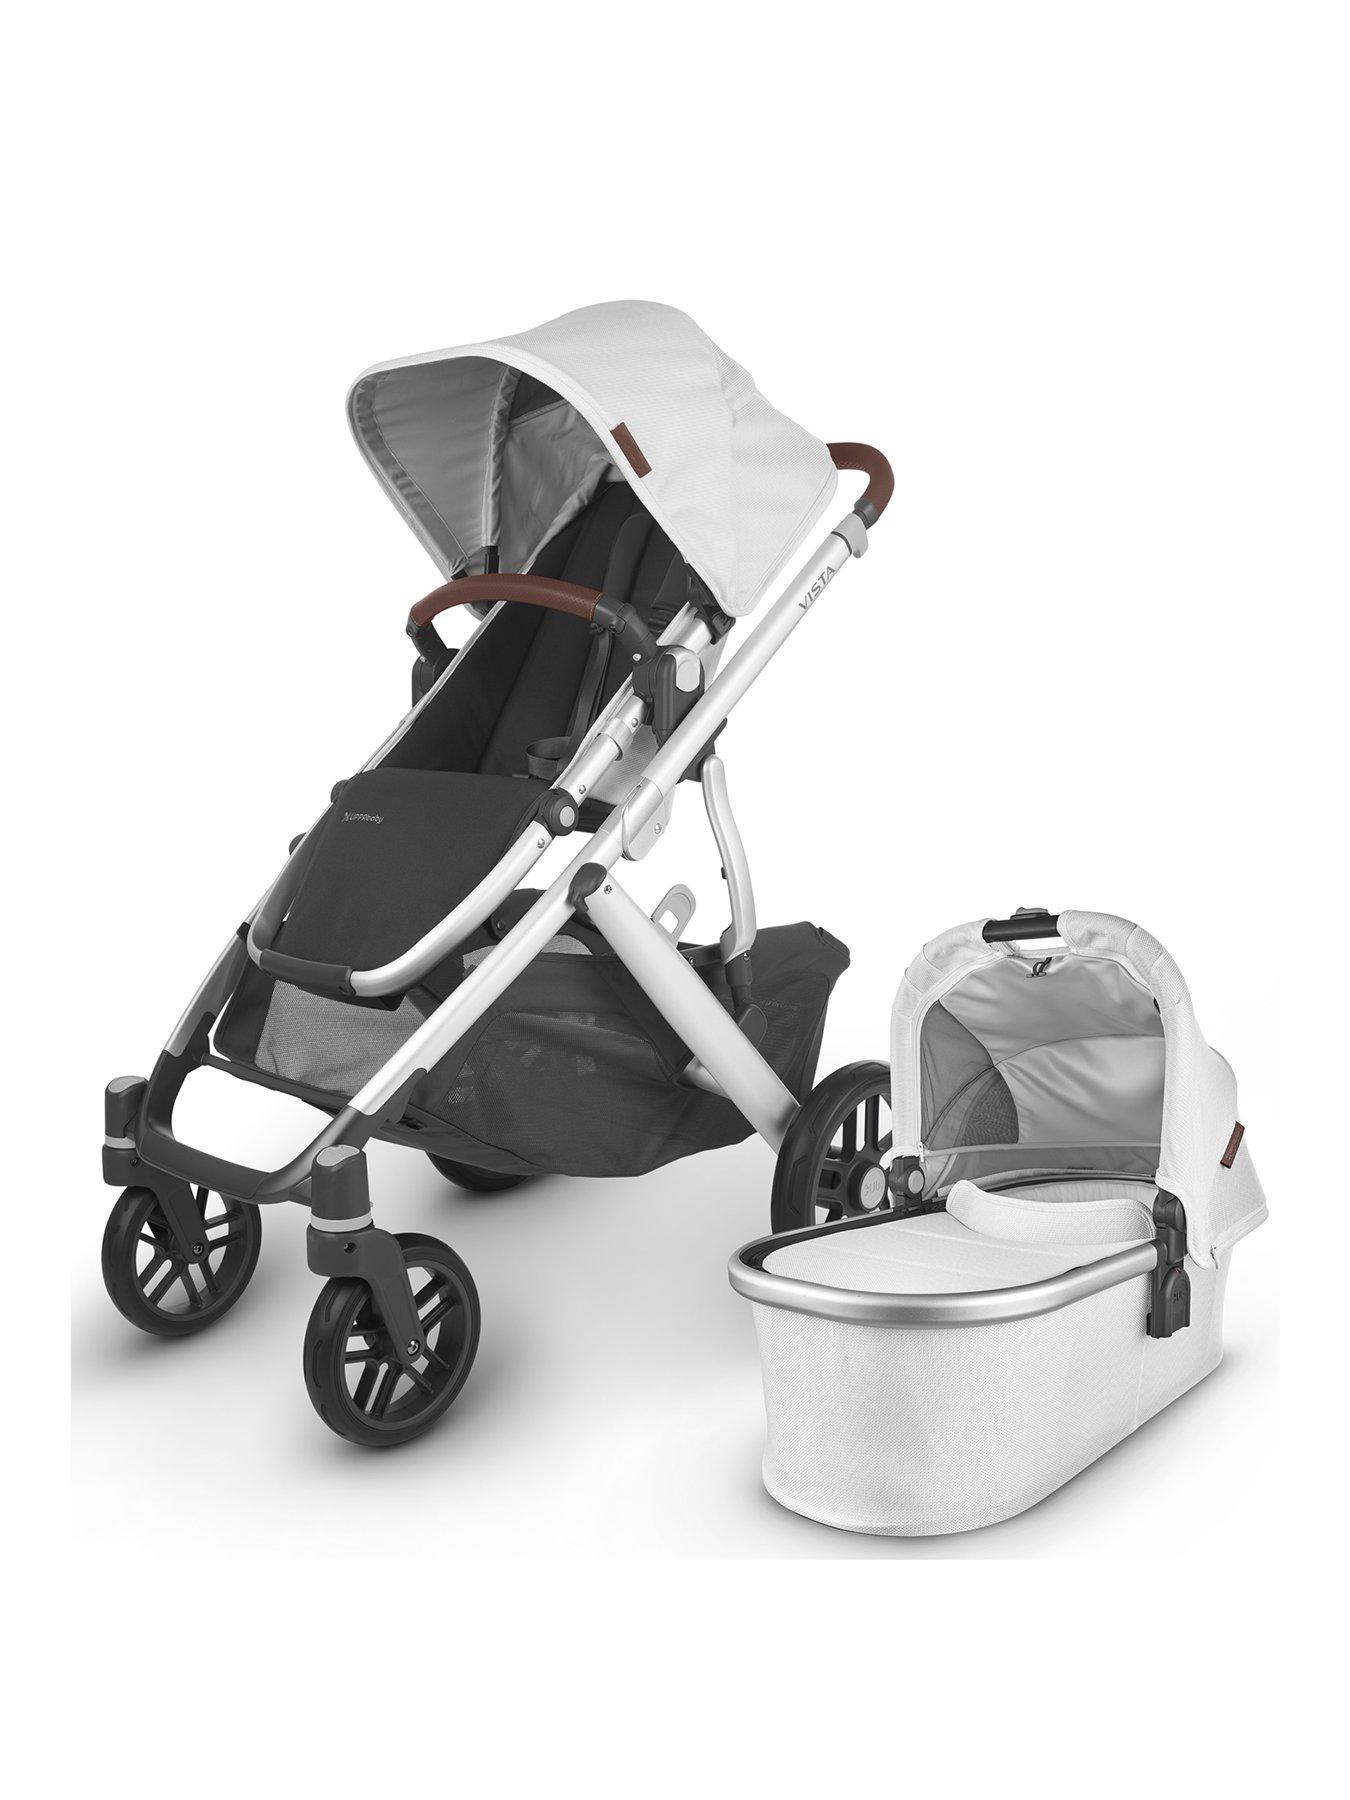 pushchair and carrycot in one